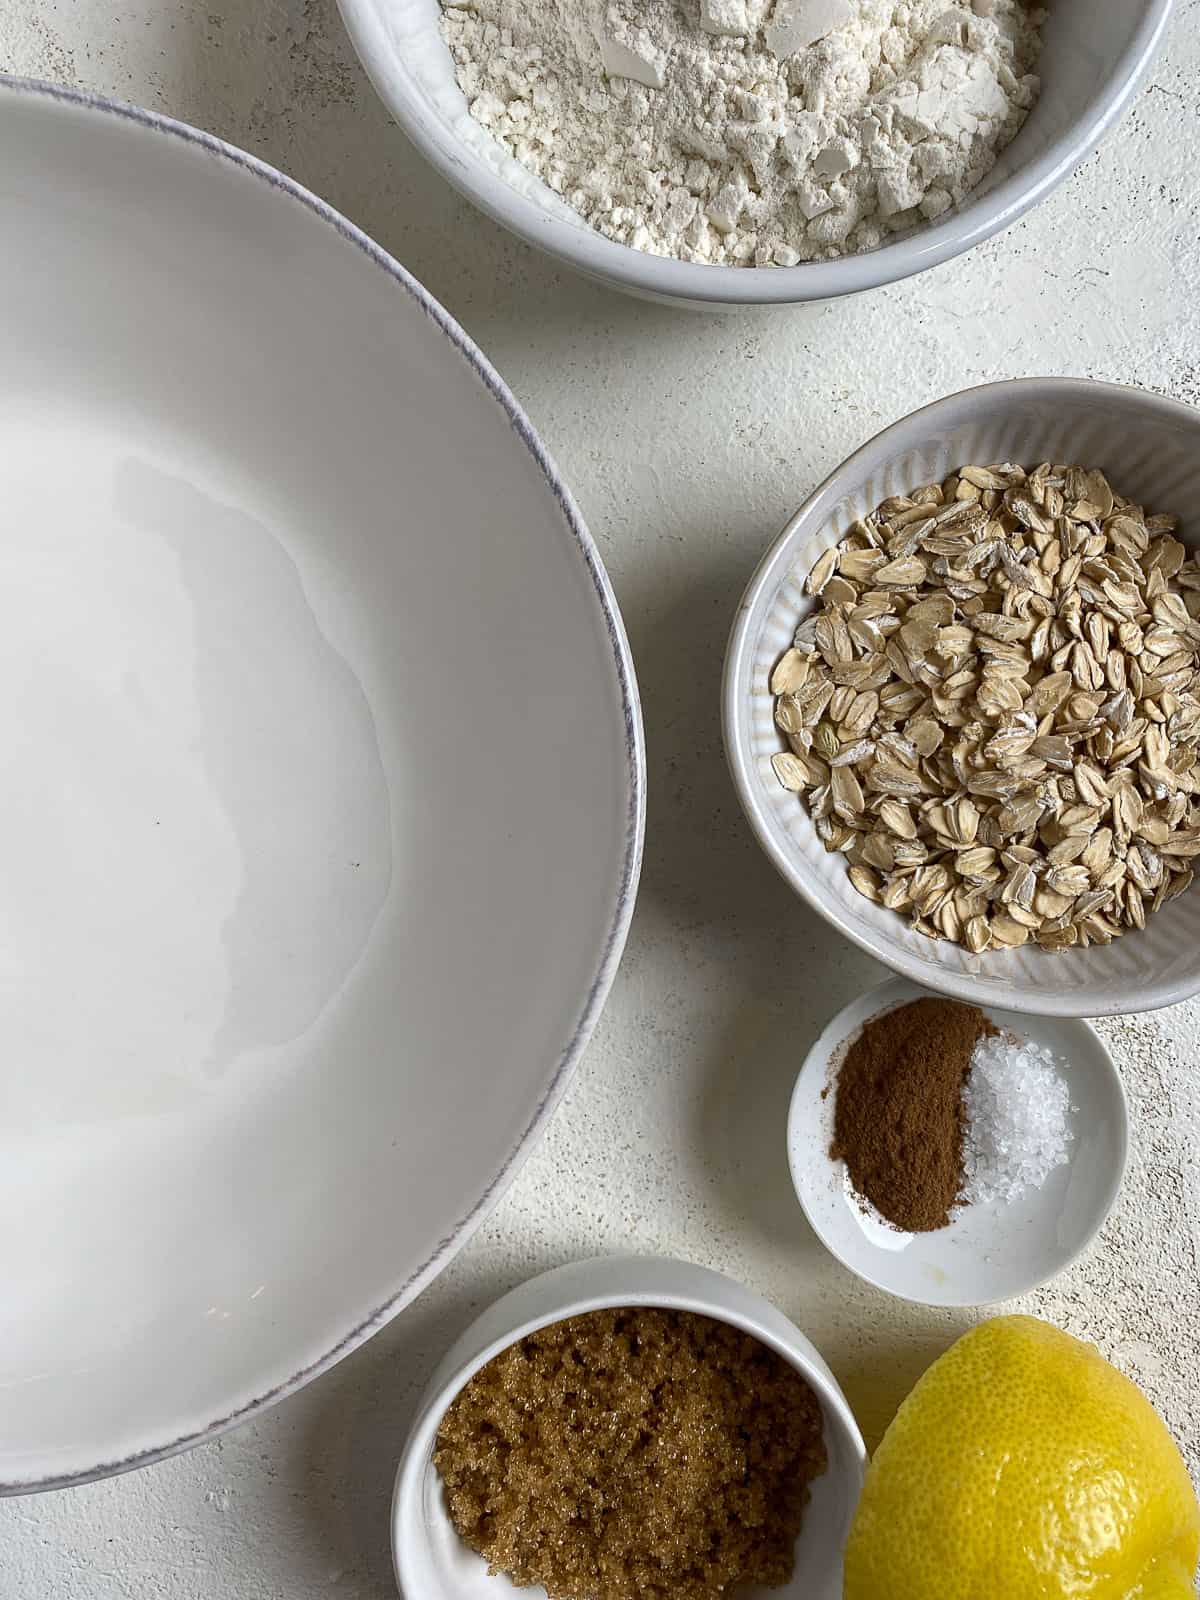 ingredients for Mixed Berry Crumb Pie measured out on a white surface alongside a bowl